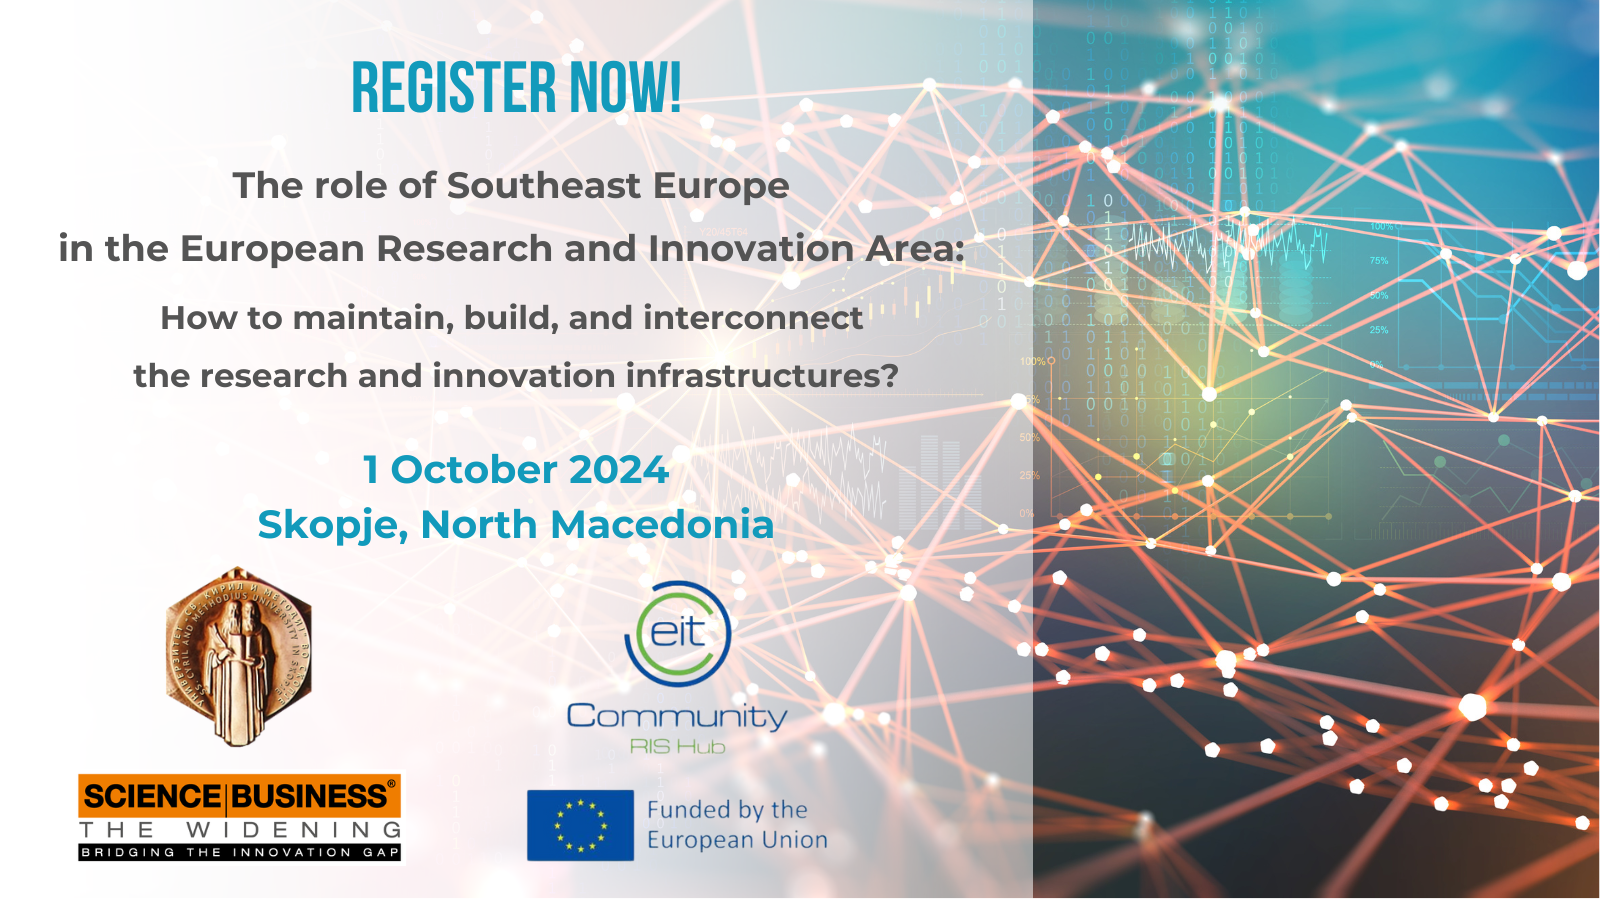 Public ScienceBusiness event in Skopje: The role of Southeast Europe in the European Research and Innovation Area – How to maintain, build, and interconnect the research and innovation infrastructures?